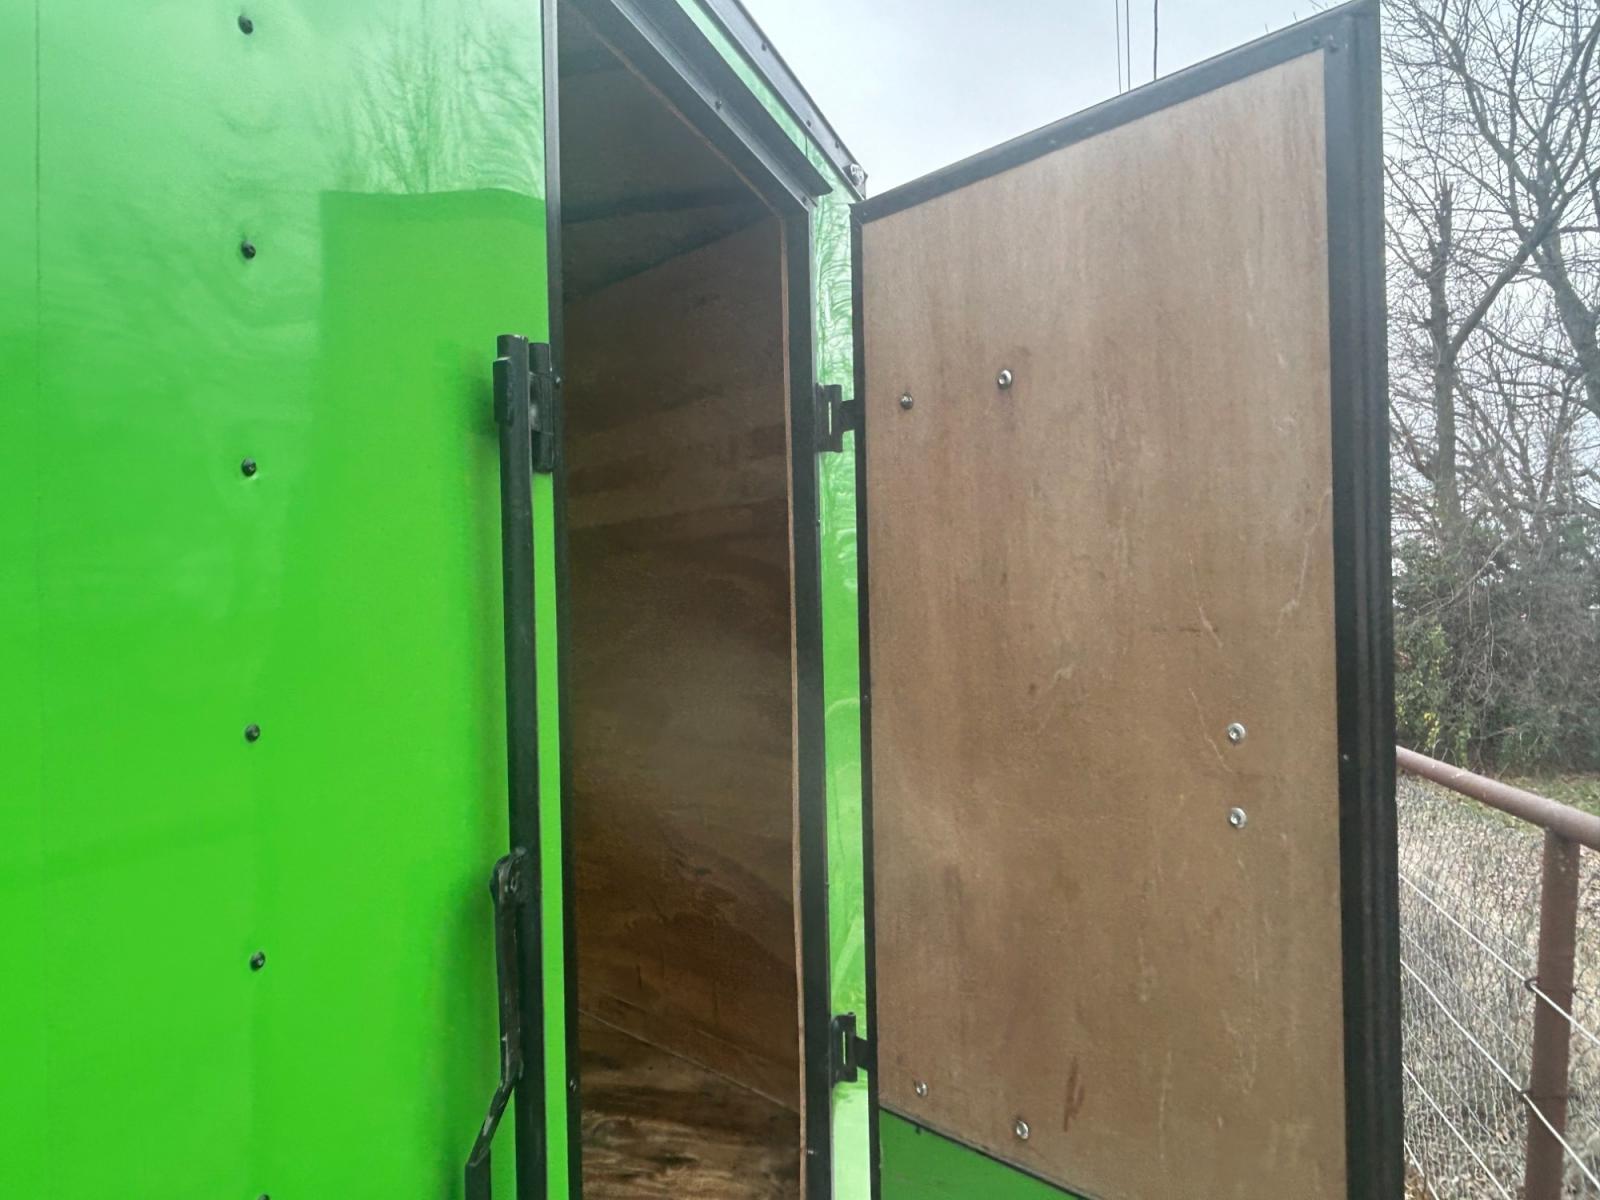 2020 GREEN /TAN DEEP SOUTH ENCLOSED TRAILER (7JKBE1624LH) , located at 17760 Hwy 62, Morris, OK, 74445, 35.609104, -95.877060 - 2020 DEEP SOUTH ENCLOSED TRAILER. THIS TRAILER IS 12 X 6.5 FT. ***MINOR DAMAGES AS SHOWN IN PICTURES*** ***WE RECOMMEND THAT THE TIRES TO BE REPLACED*** WE CAN REPLACE THE TIRES FOR AN ADDITIONAL $400 $5,500 - Photo #1